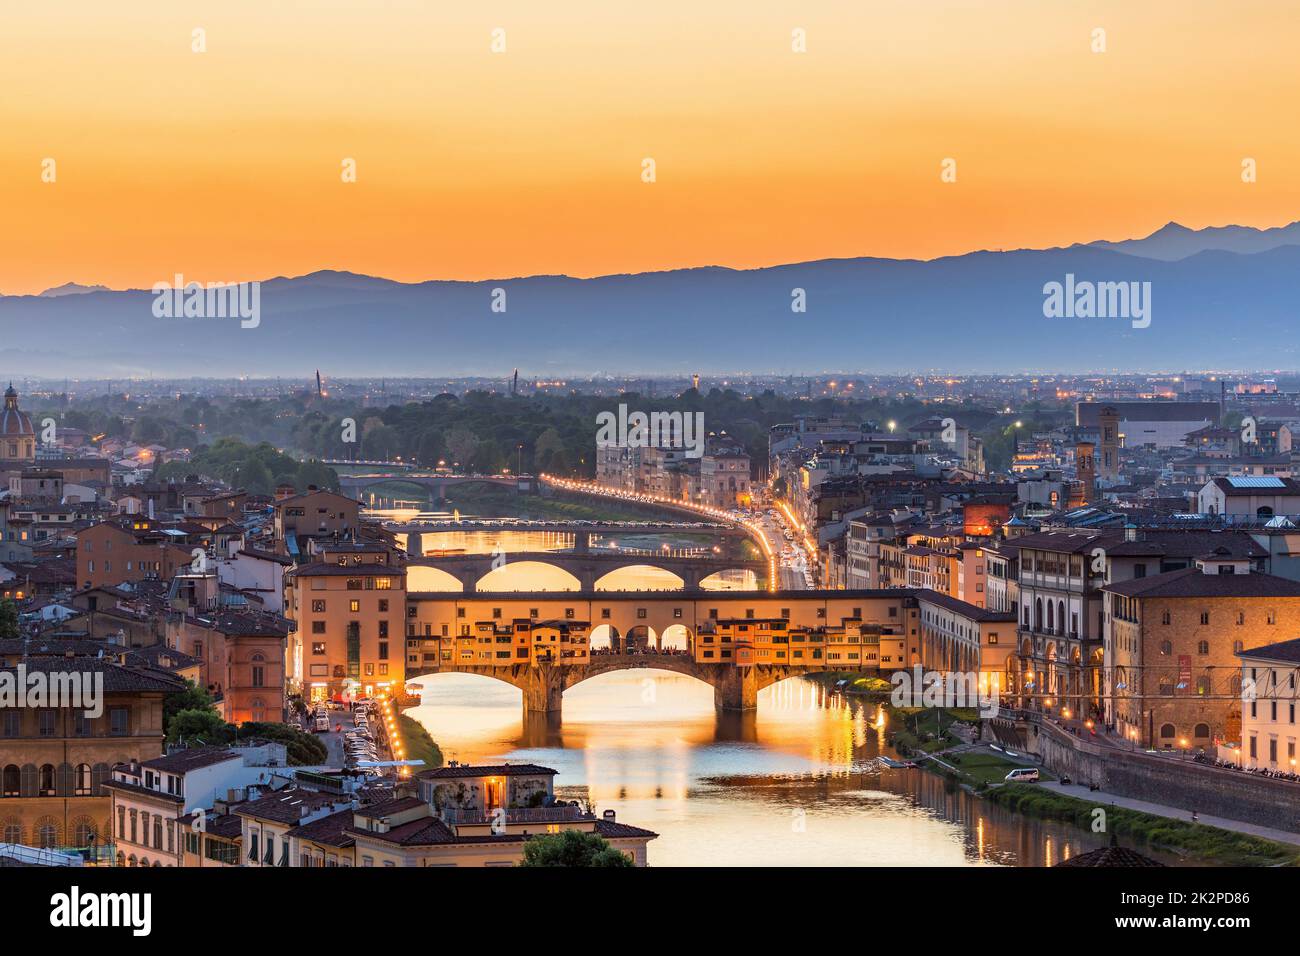 View of Florence at sunset with the Ponte Vecchio bridge over the Arno River Stock Photo